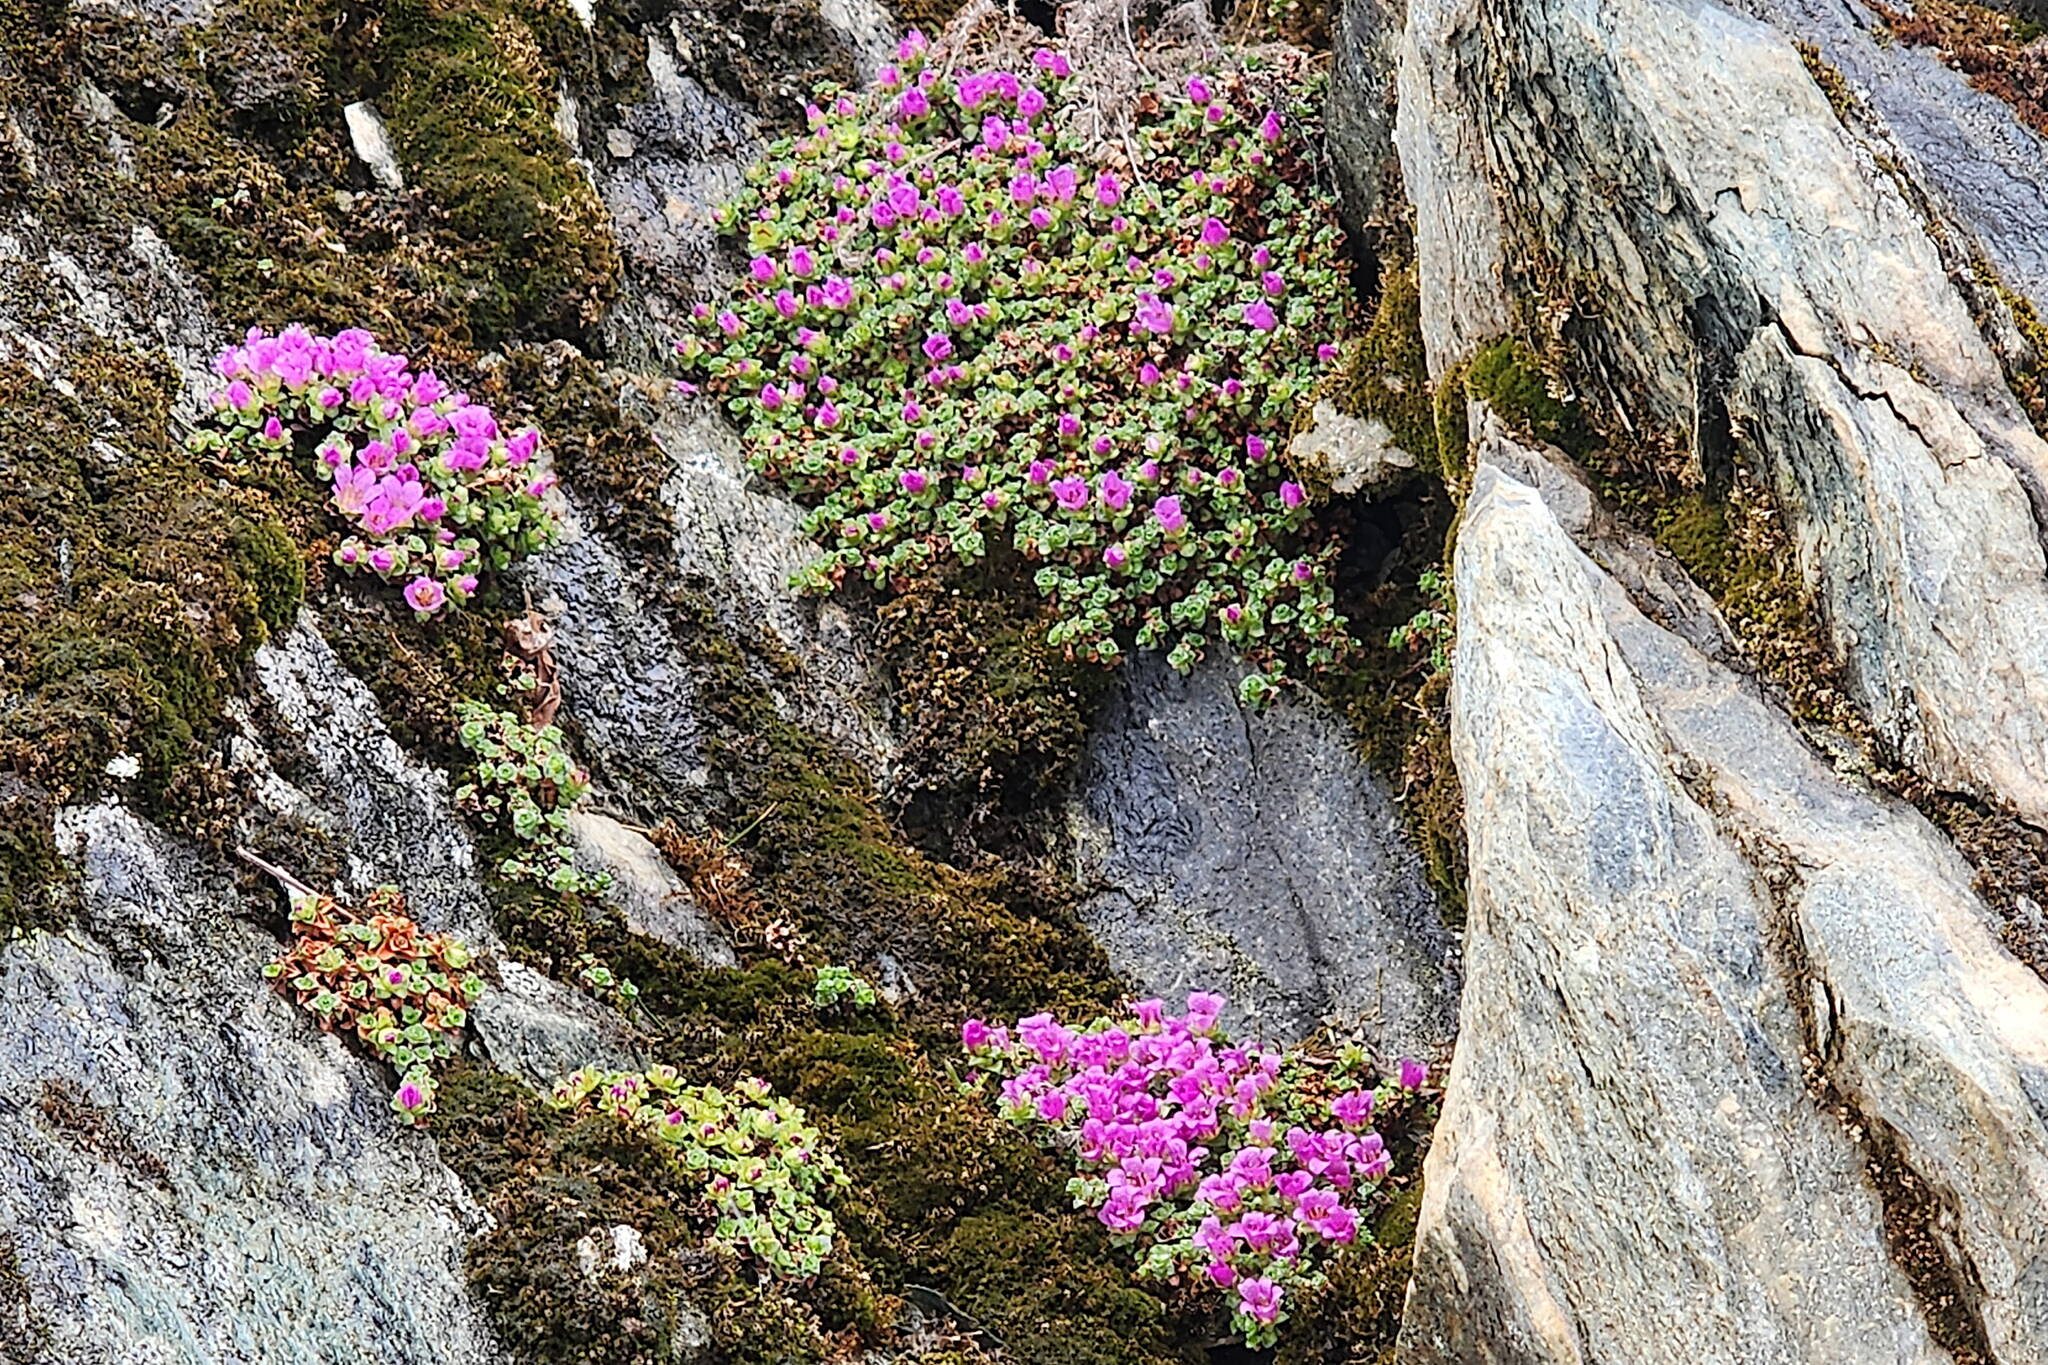 Purple mountain saxifrage blooms on cliffs along Perseverance Trail in early April. (Photo by Pam Bergeson)